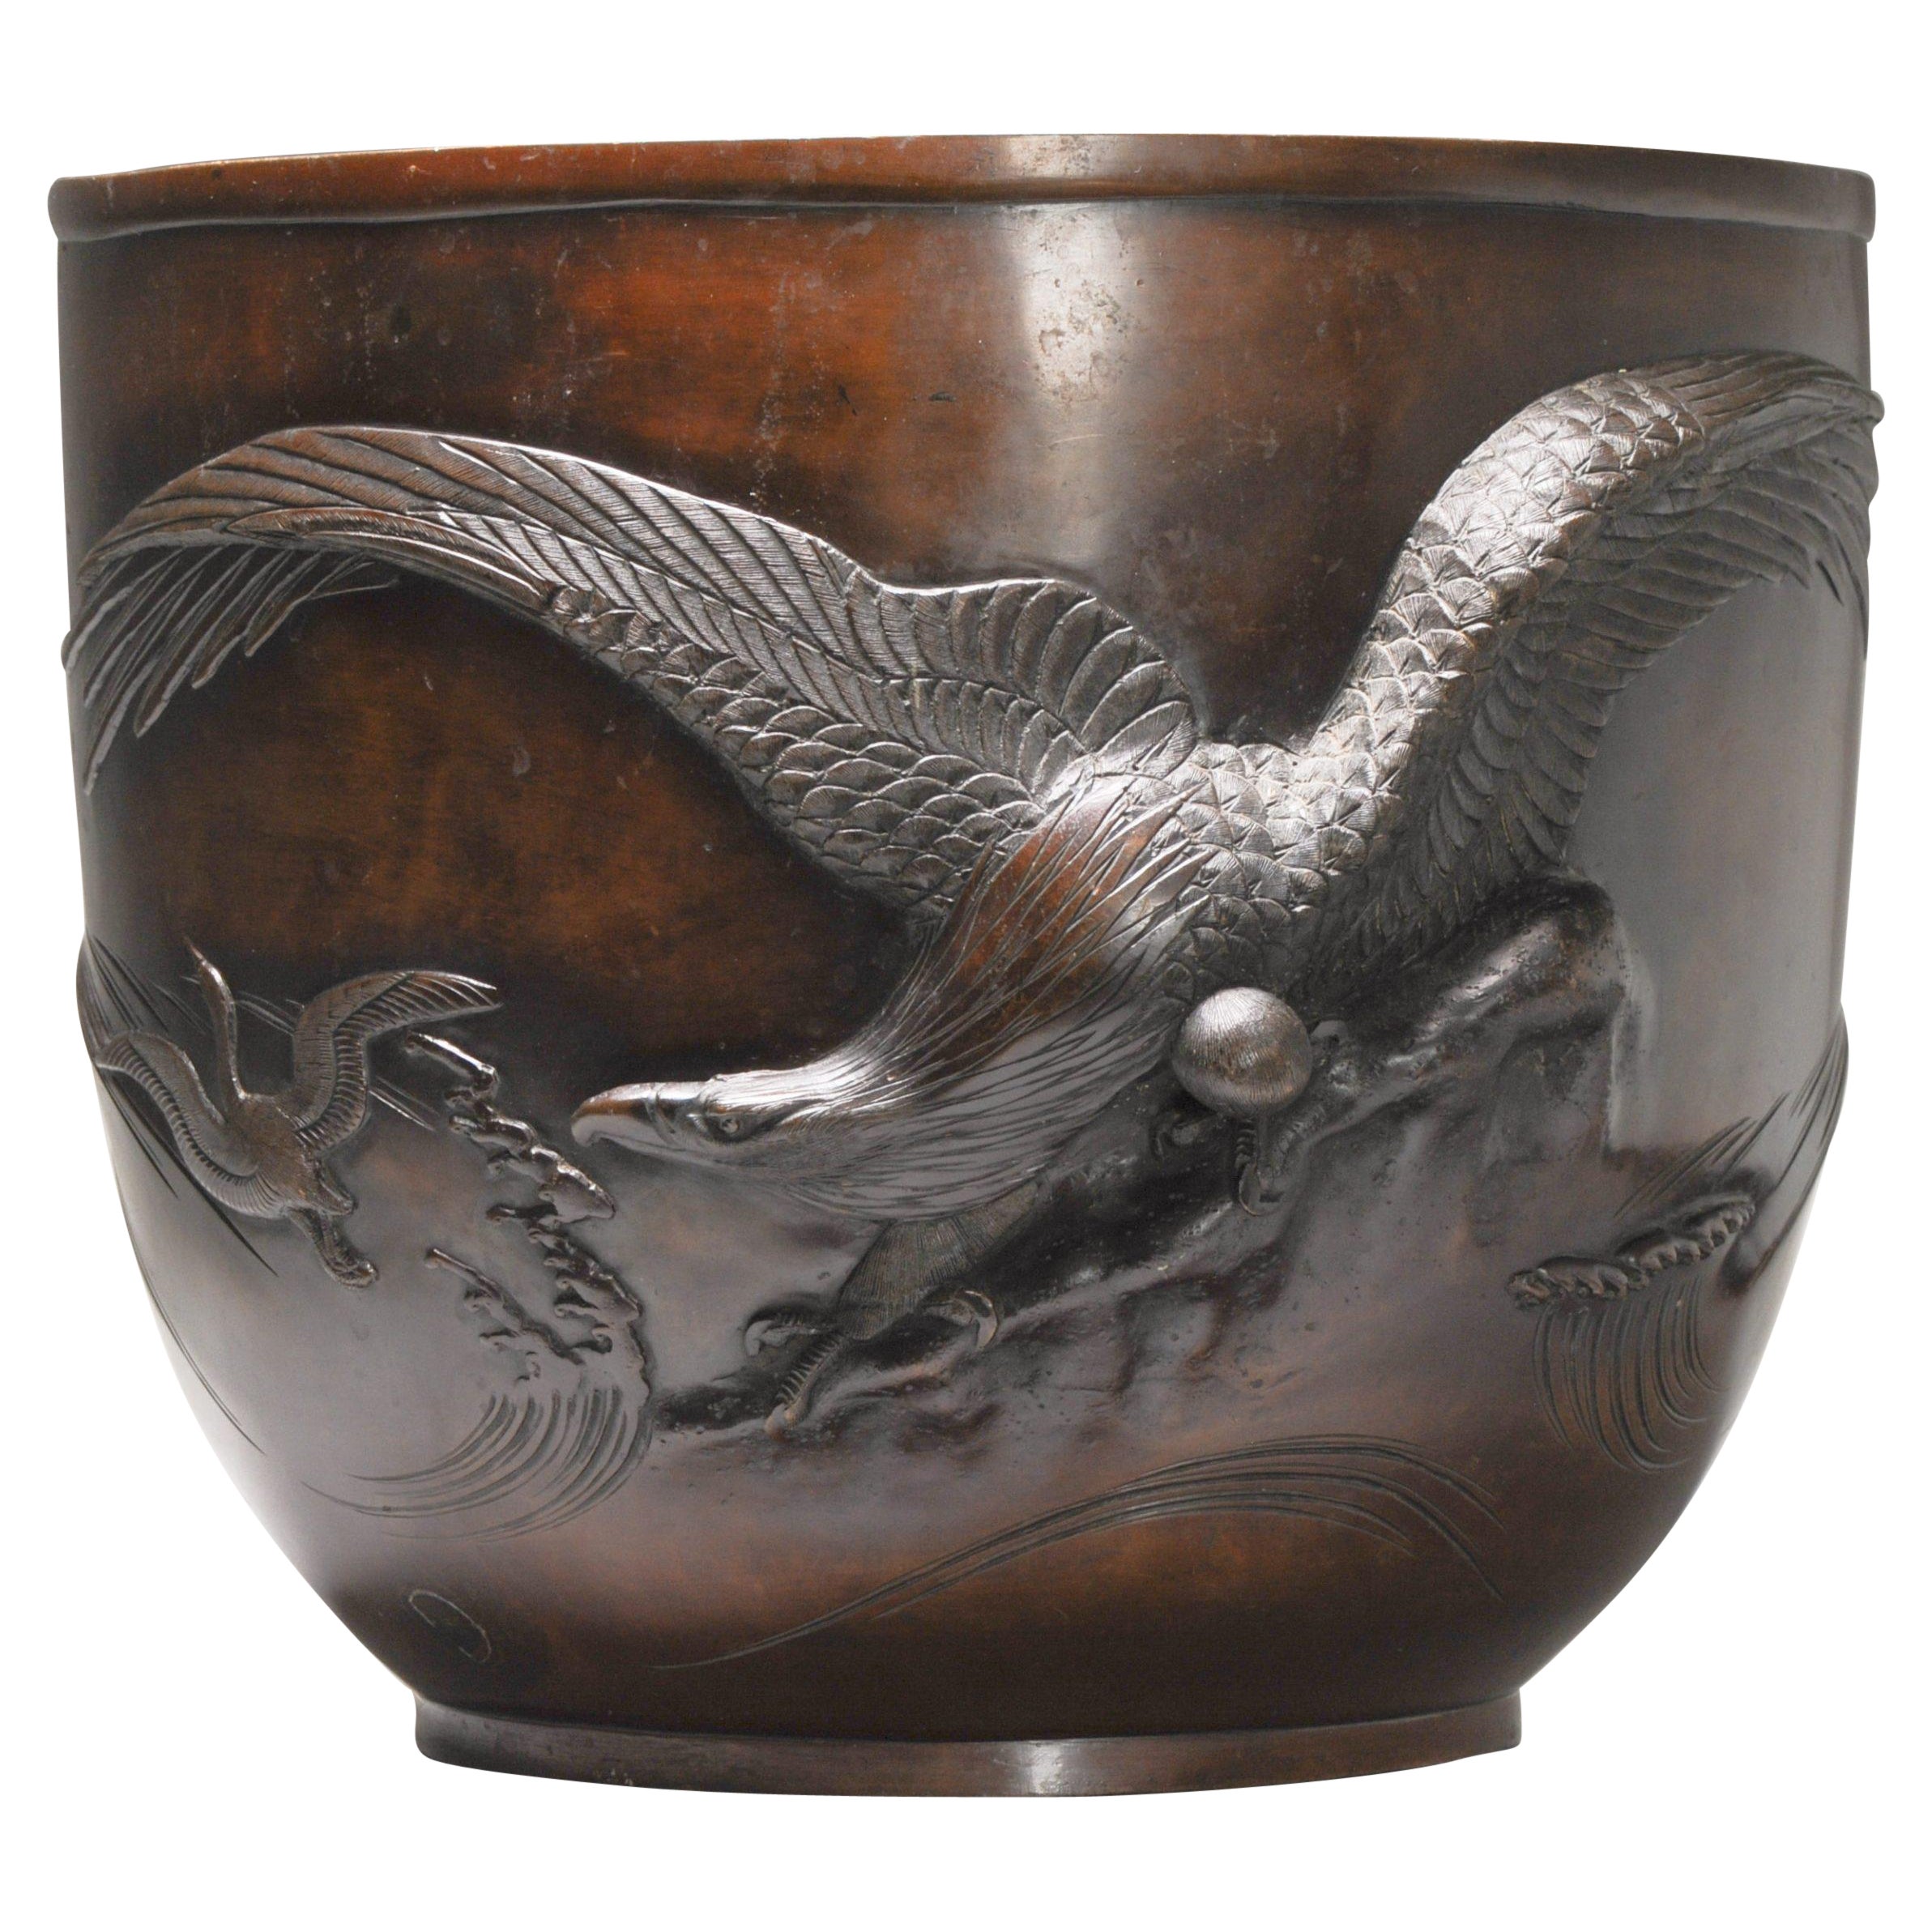 Large Antique Bronze Meiji Jardiniere with Eagle Hunting 19th C Japan, Japanese For Sale